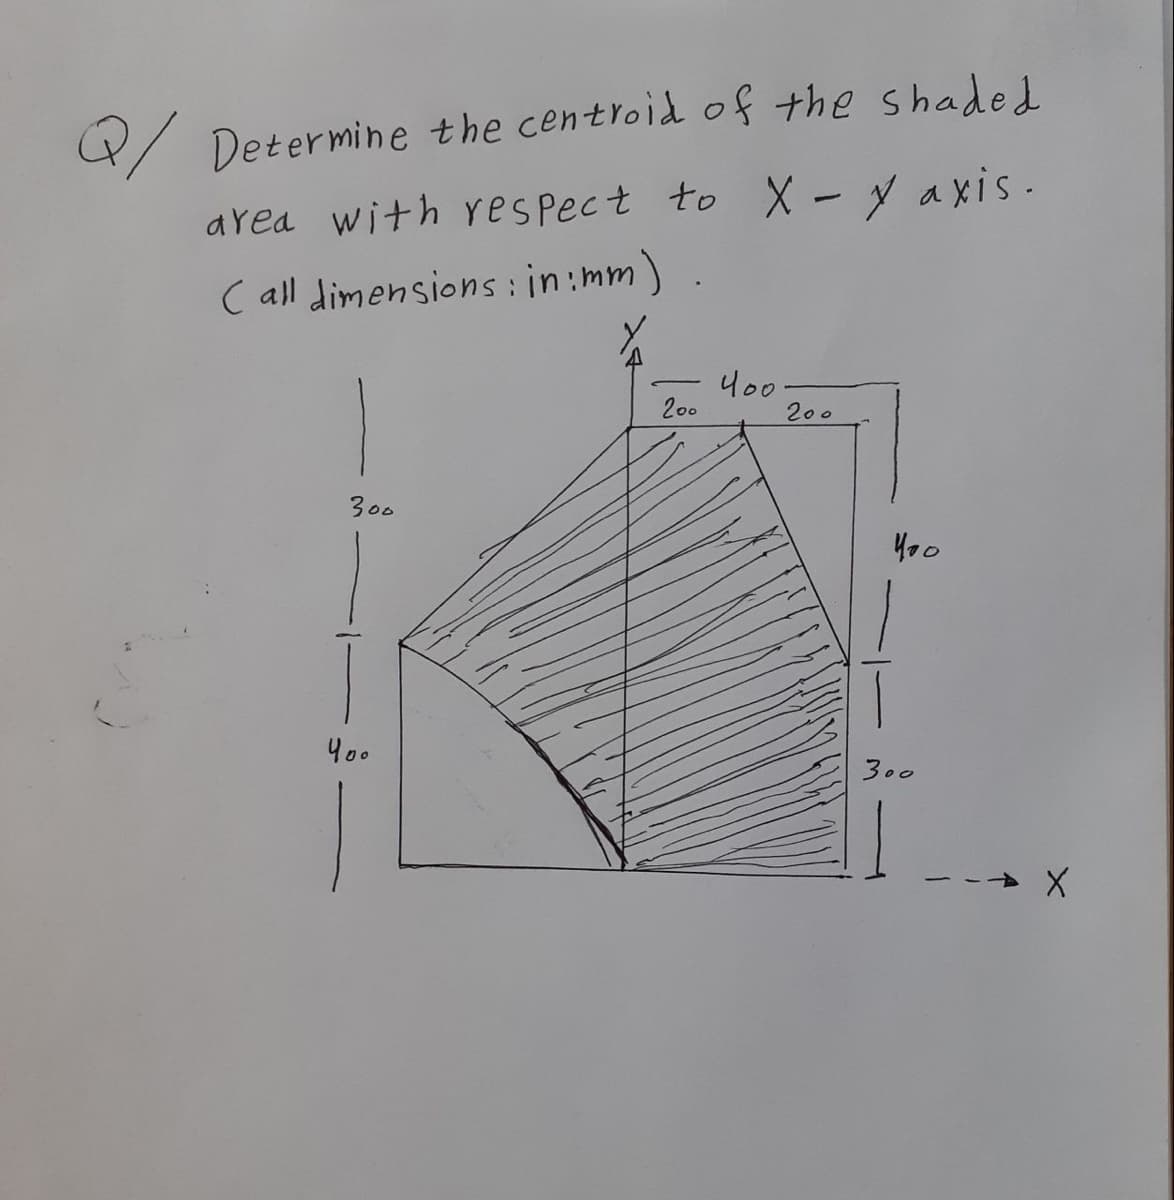 4/ Determine the centroid of the shaded
area with yes pect to X - y axis.
C all dimensions: in:mm)
200
200
300
Y00
300
